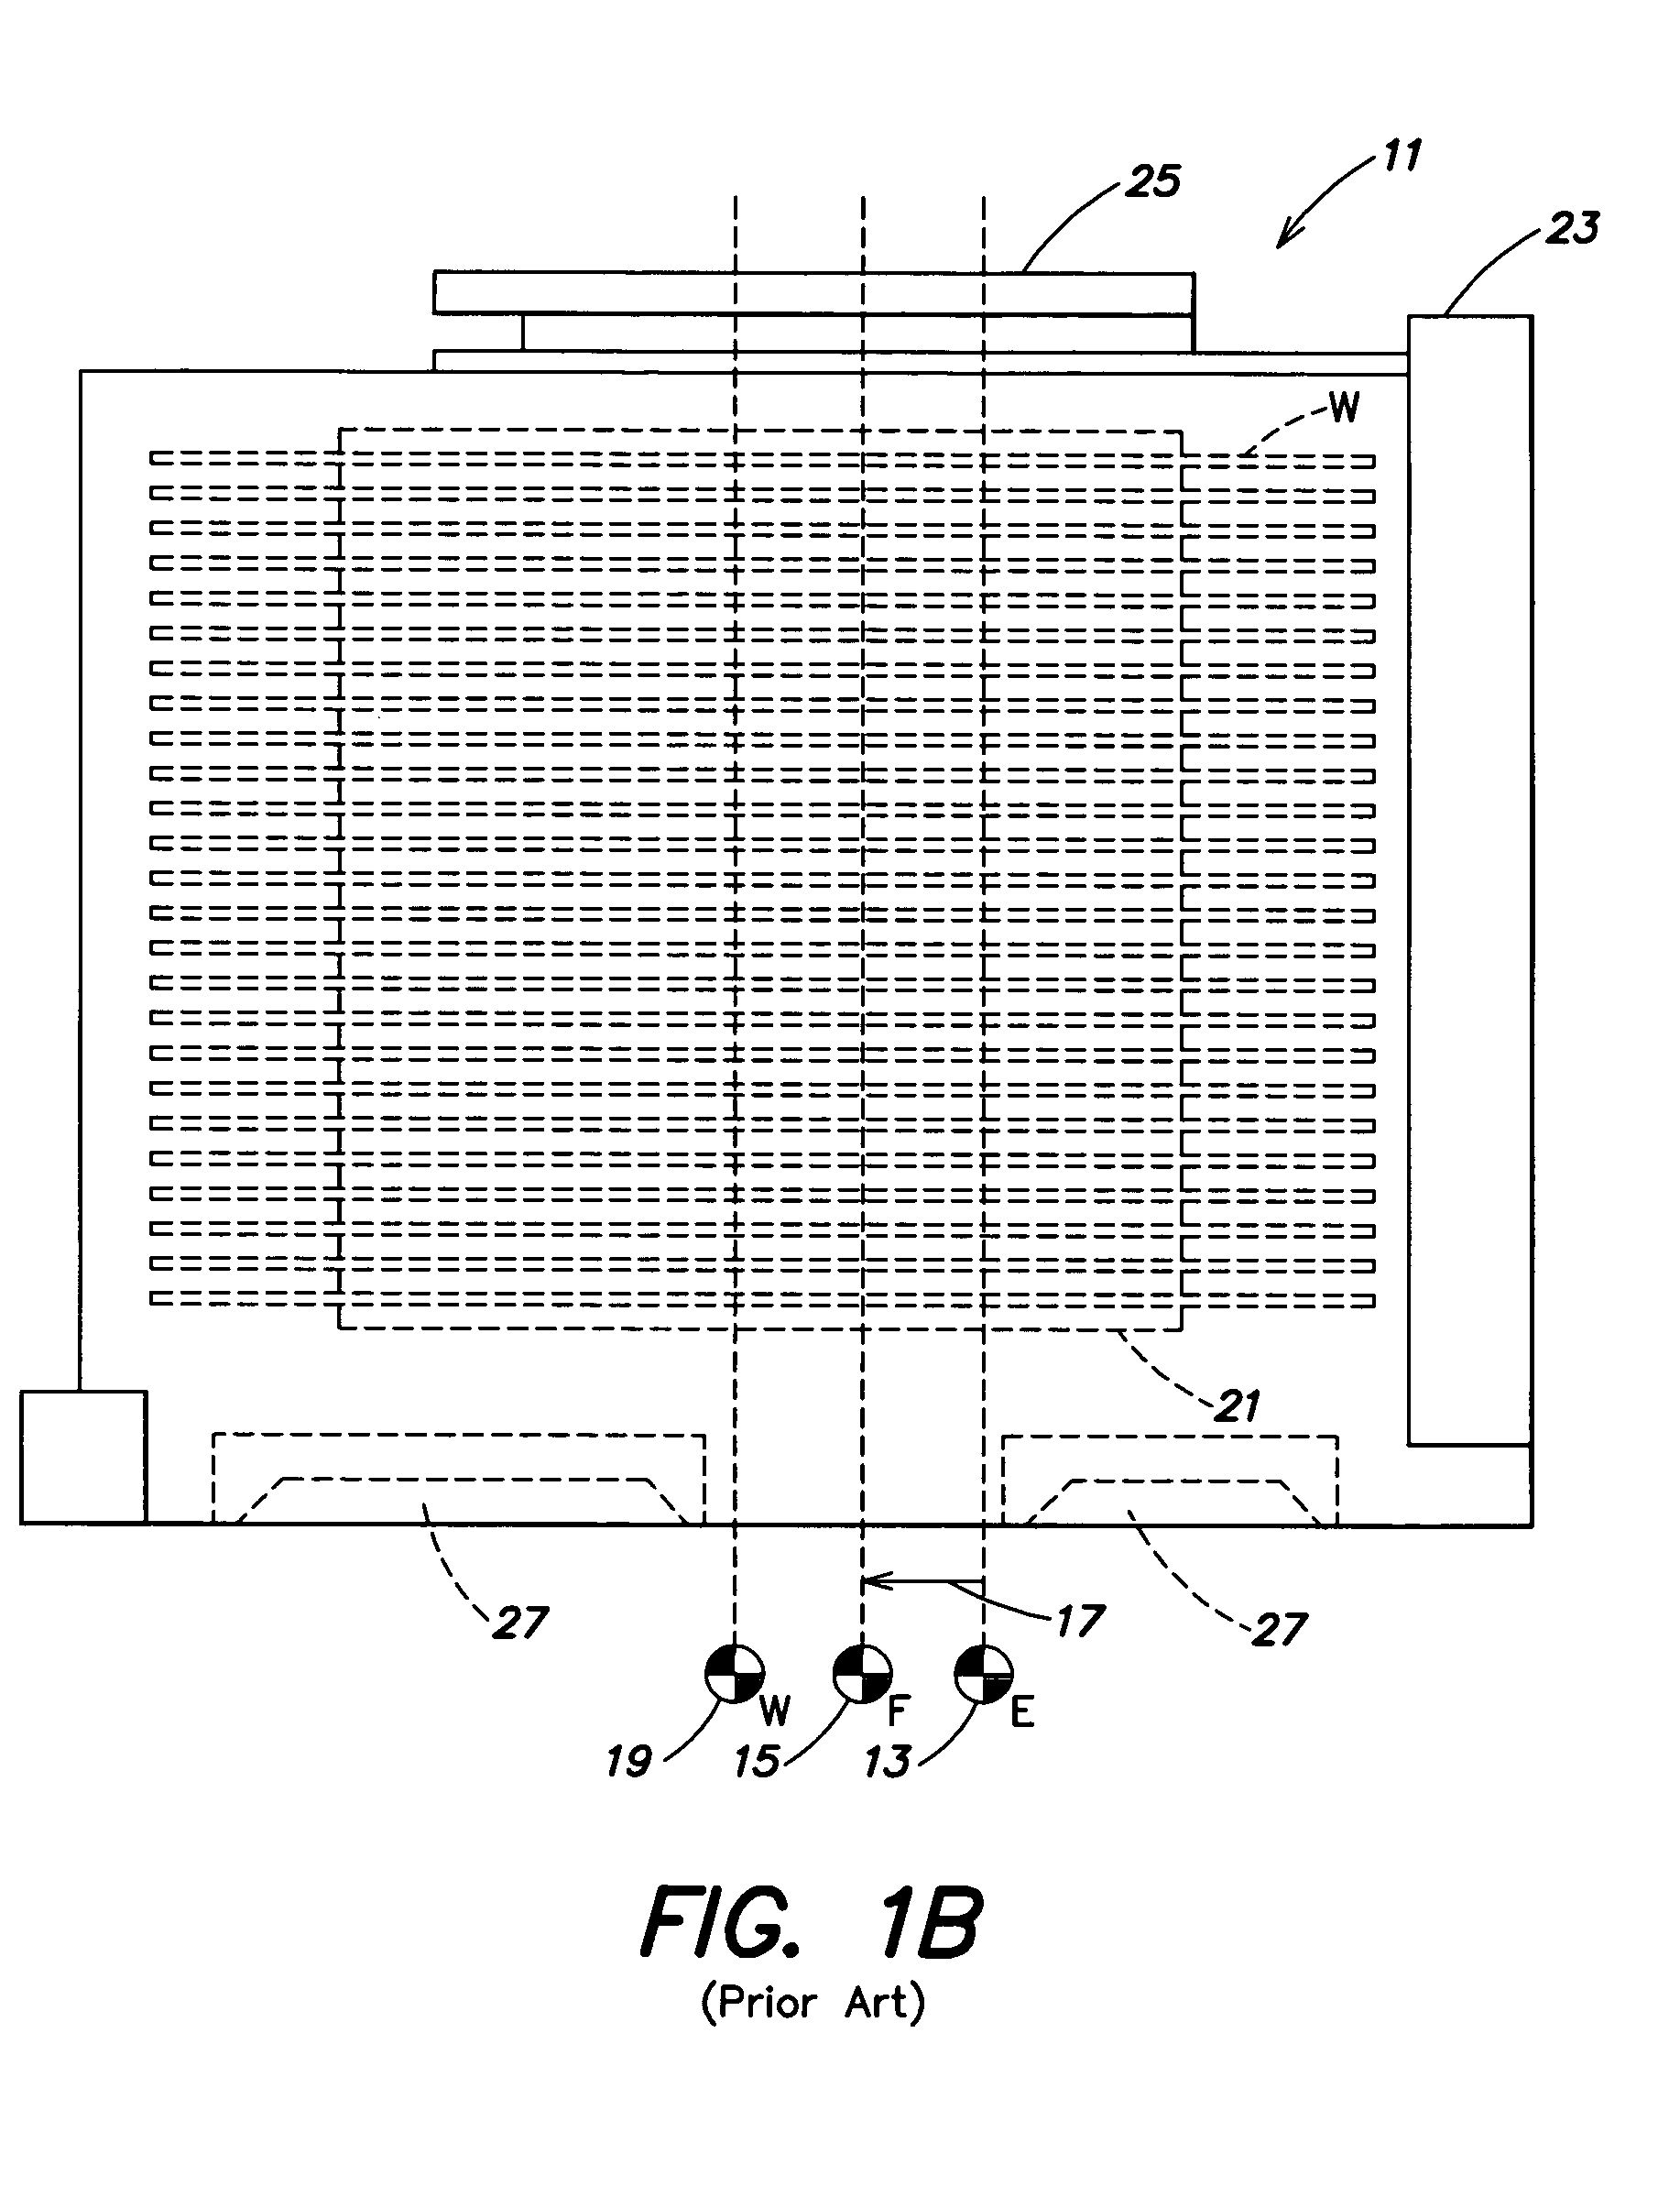 Methods and apparatus for carriers suitable for use in high-speed/high-acceleration transport systems